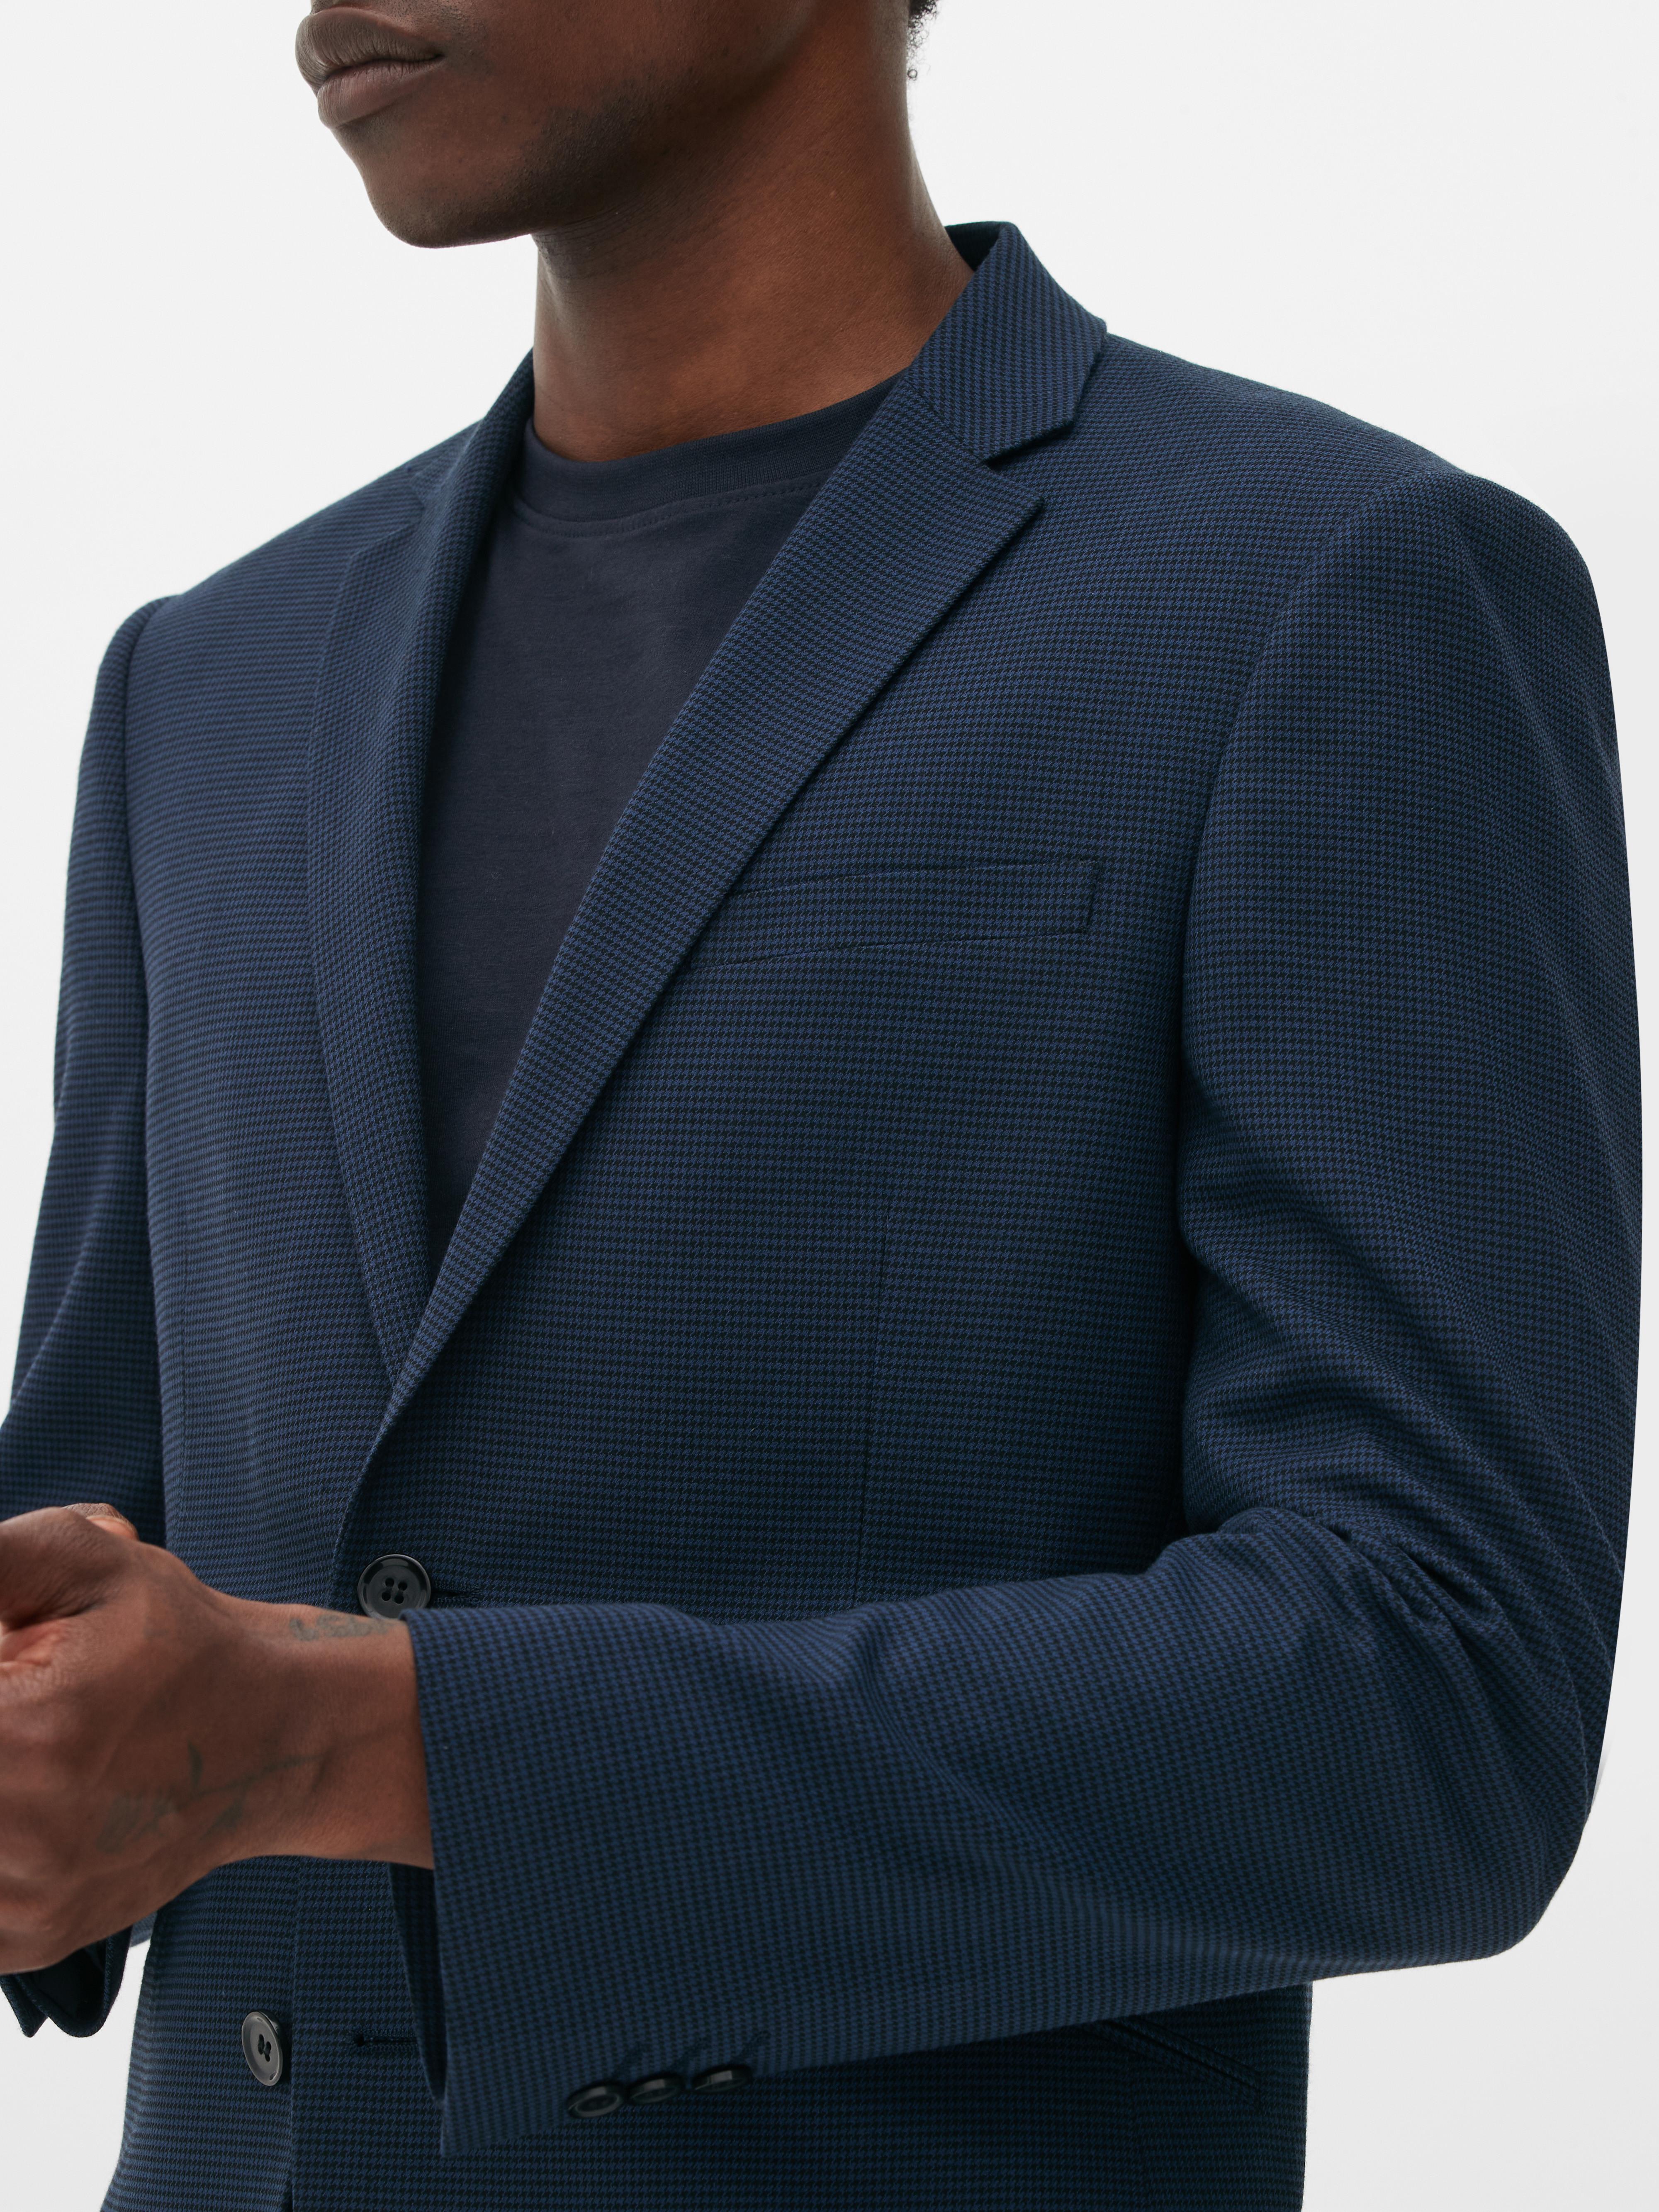 Puppytooth Single-Breasted Suit Jacket